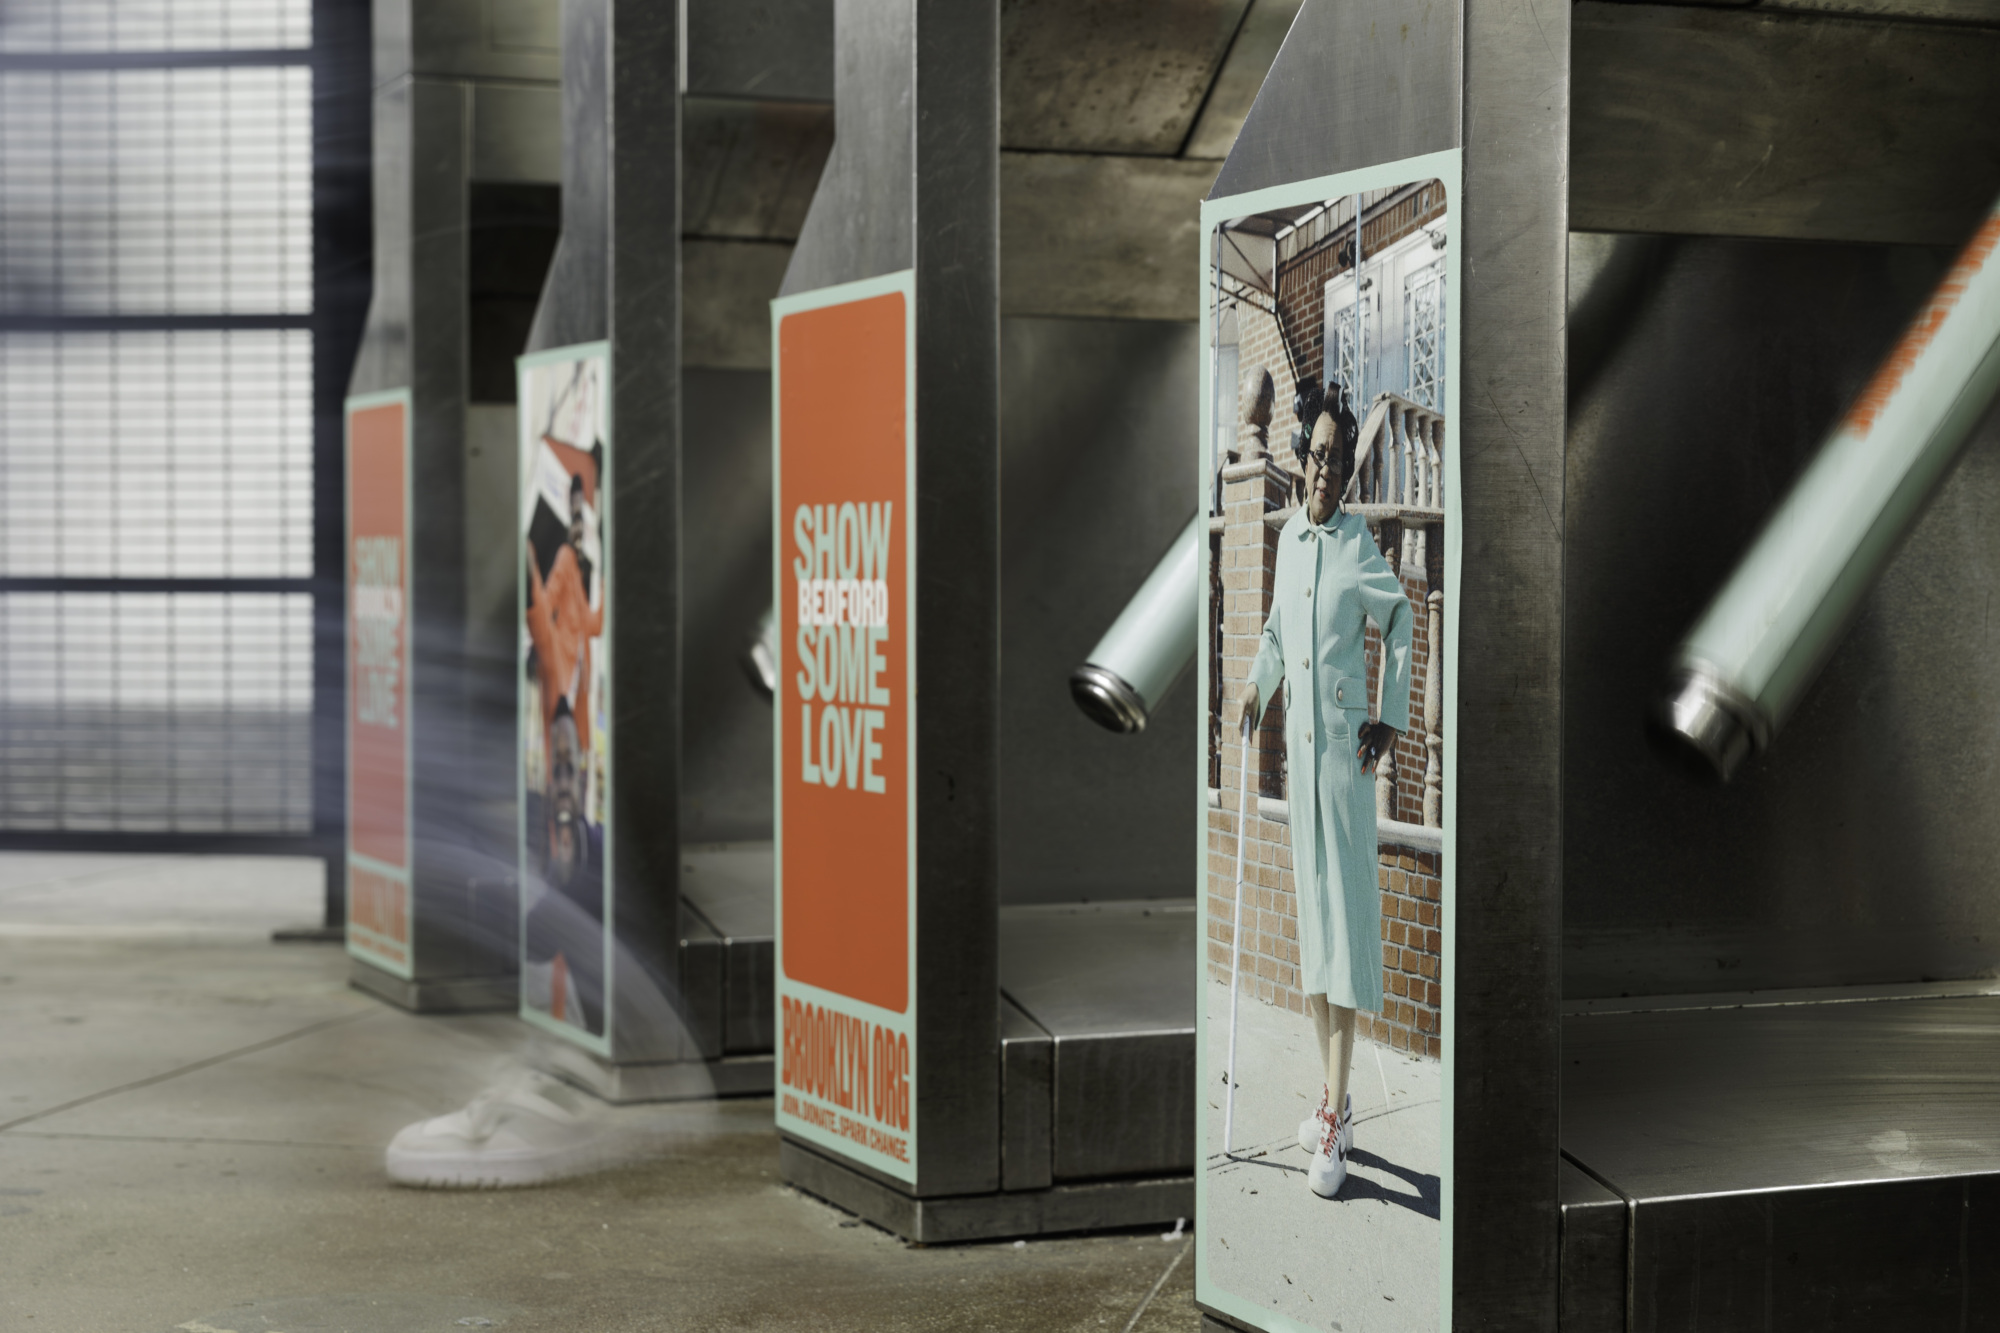 A public space with turnstiles, partially open. Each turnstile has a poster; one poster reads "SHOW BE KINDNESS SOME LOVE," and another shows a person in a light blue outfit walking.